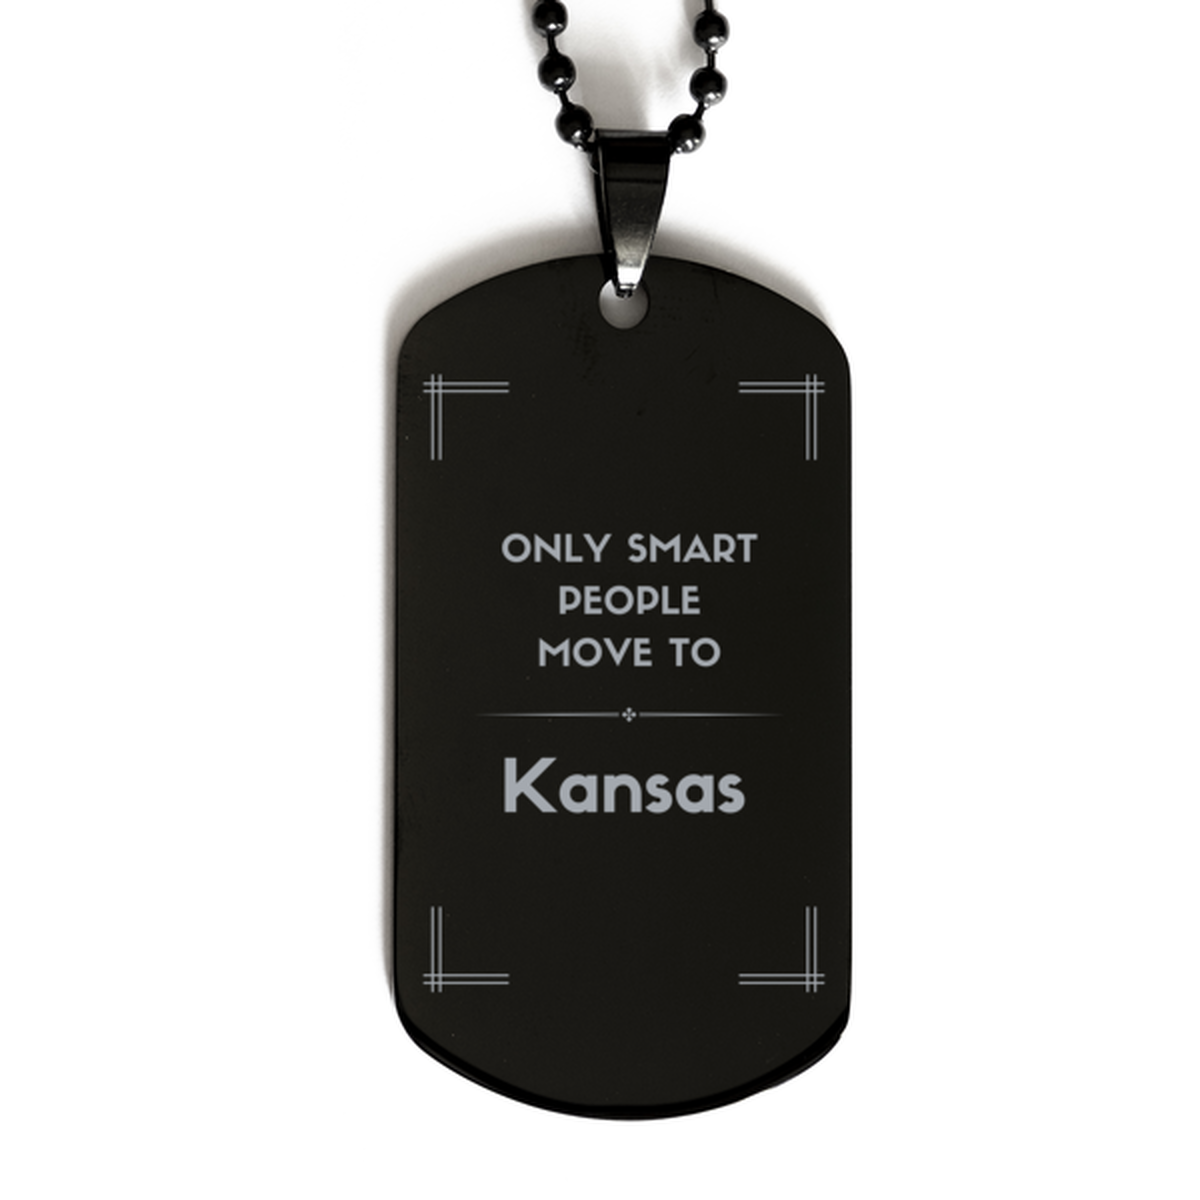 Only smart people move to Kansas Black Dog Tag, Gag Gifts For Kansas, Move to Kansas Gifts for Friends Coworker Funny Saying Quote